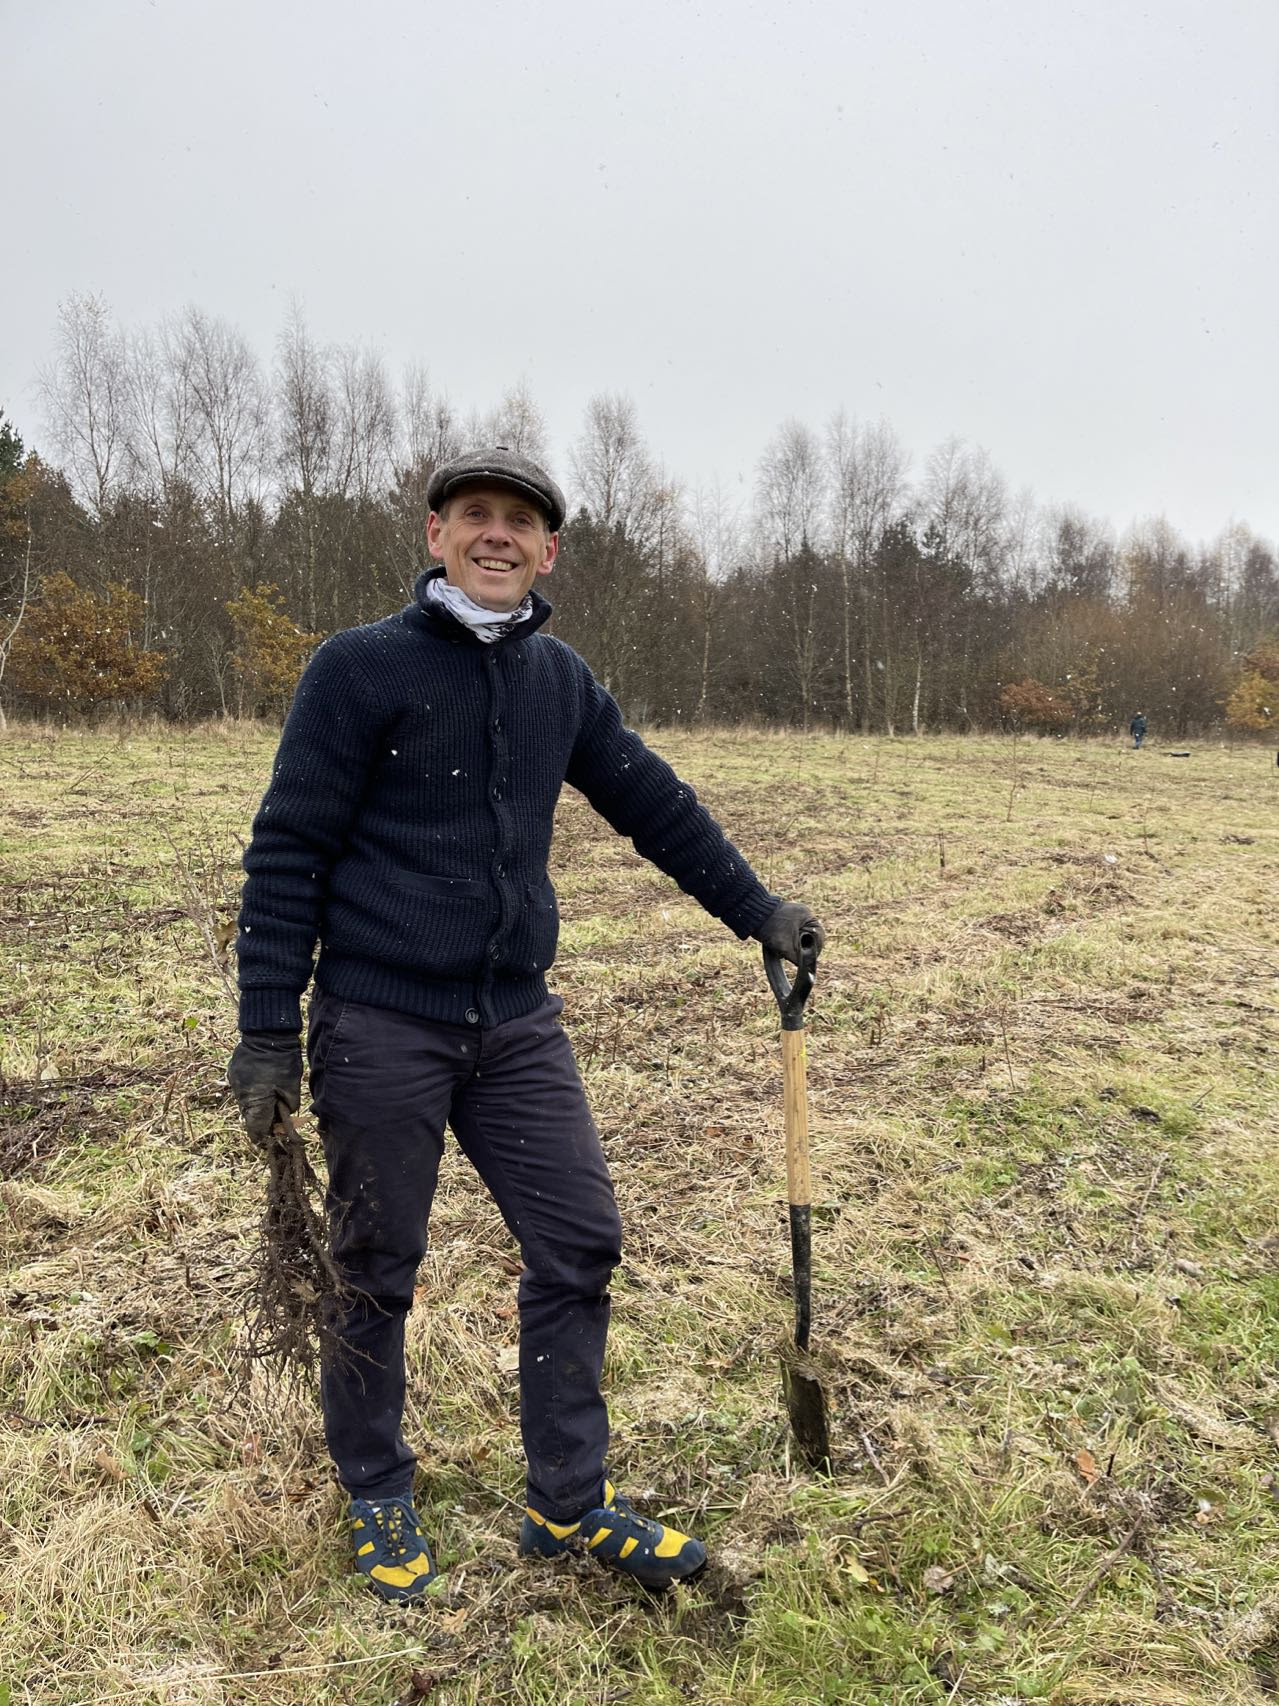 Councillor Scott Cunliffe holding a shovel and trees at the tree planting site